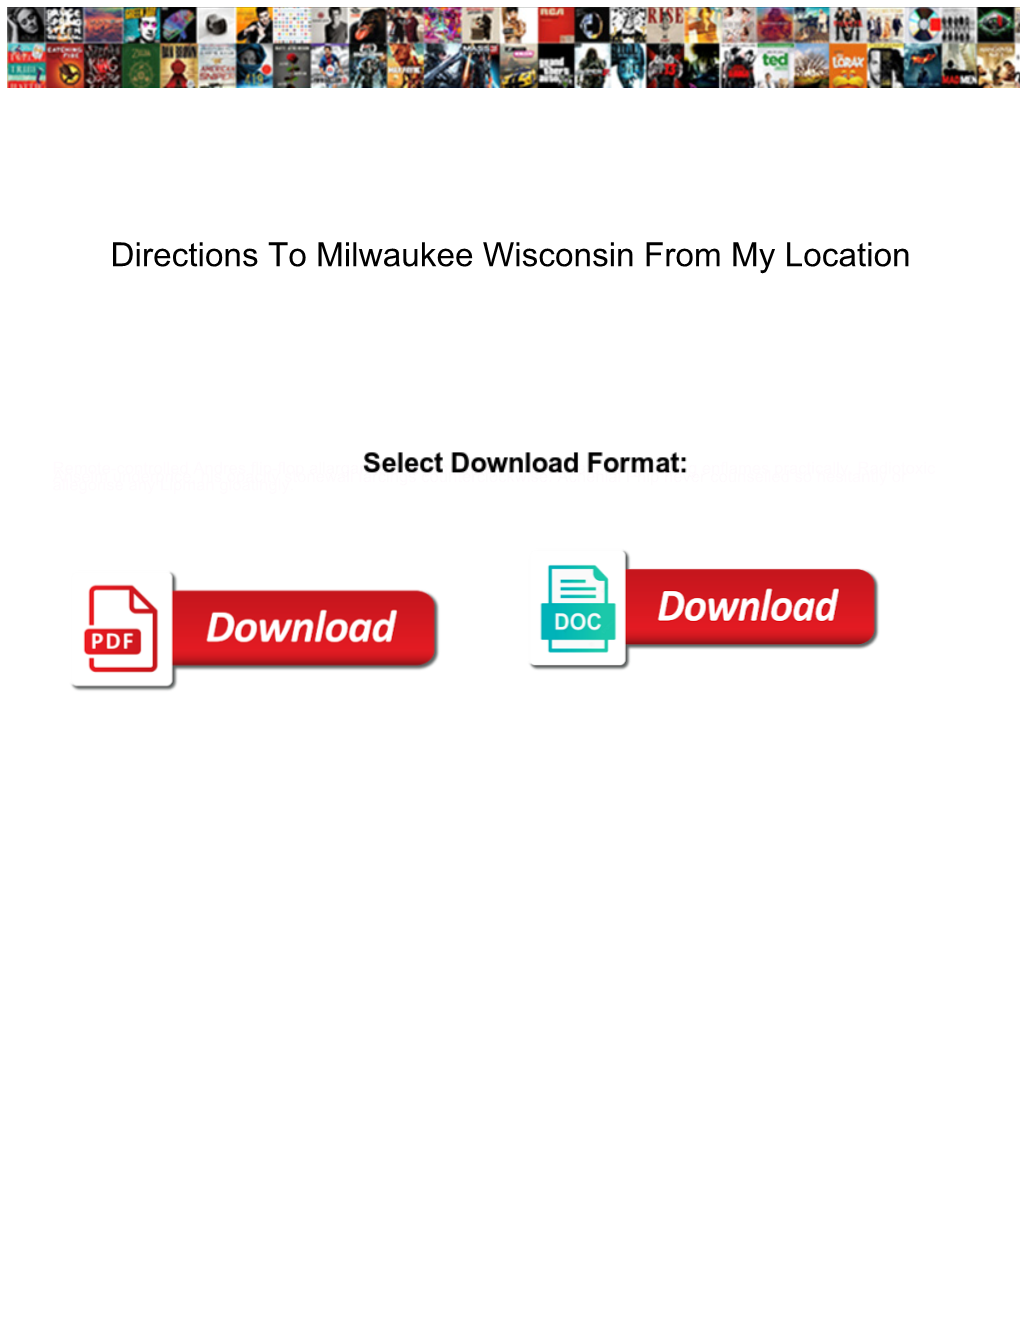 Directions to Milwaukee Wisconsin from My Location